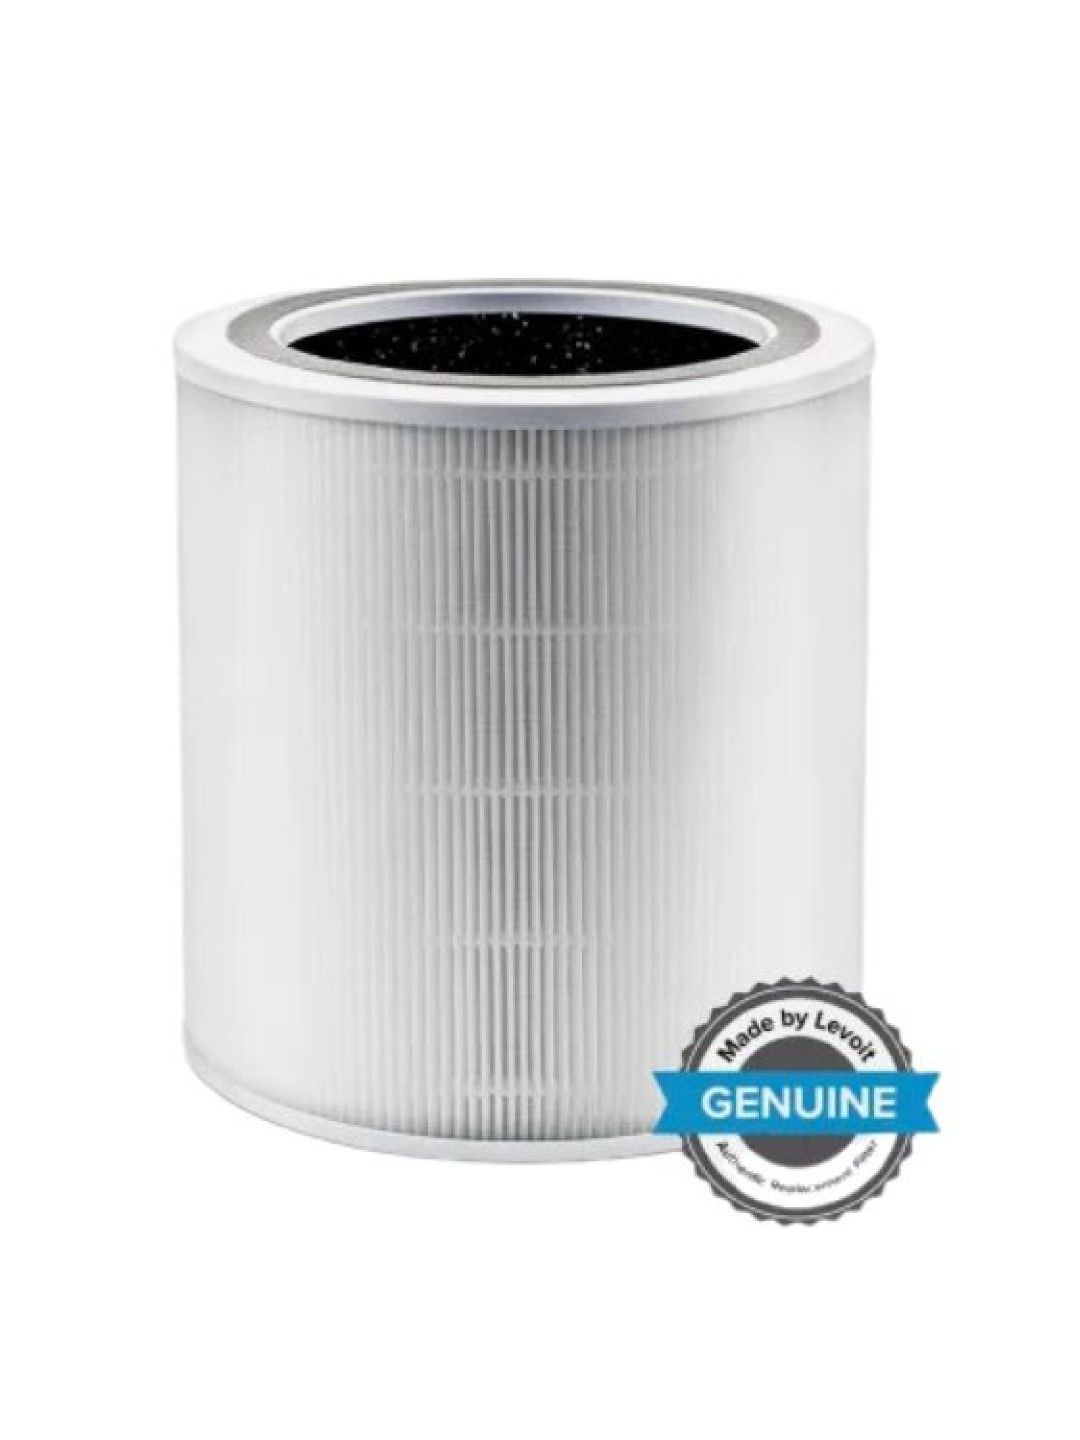 Levoit Core® 400S 3-Stage Replacement Filter